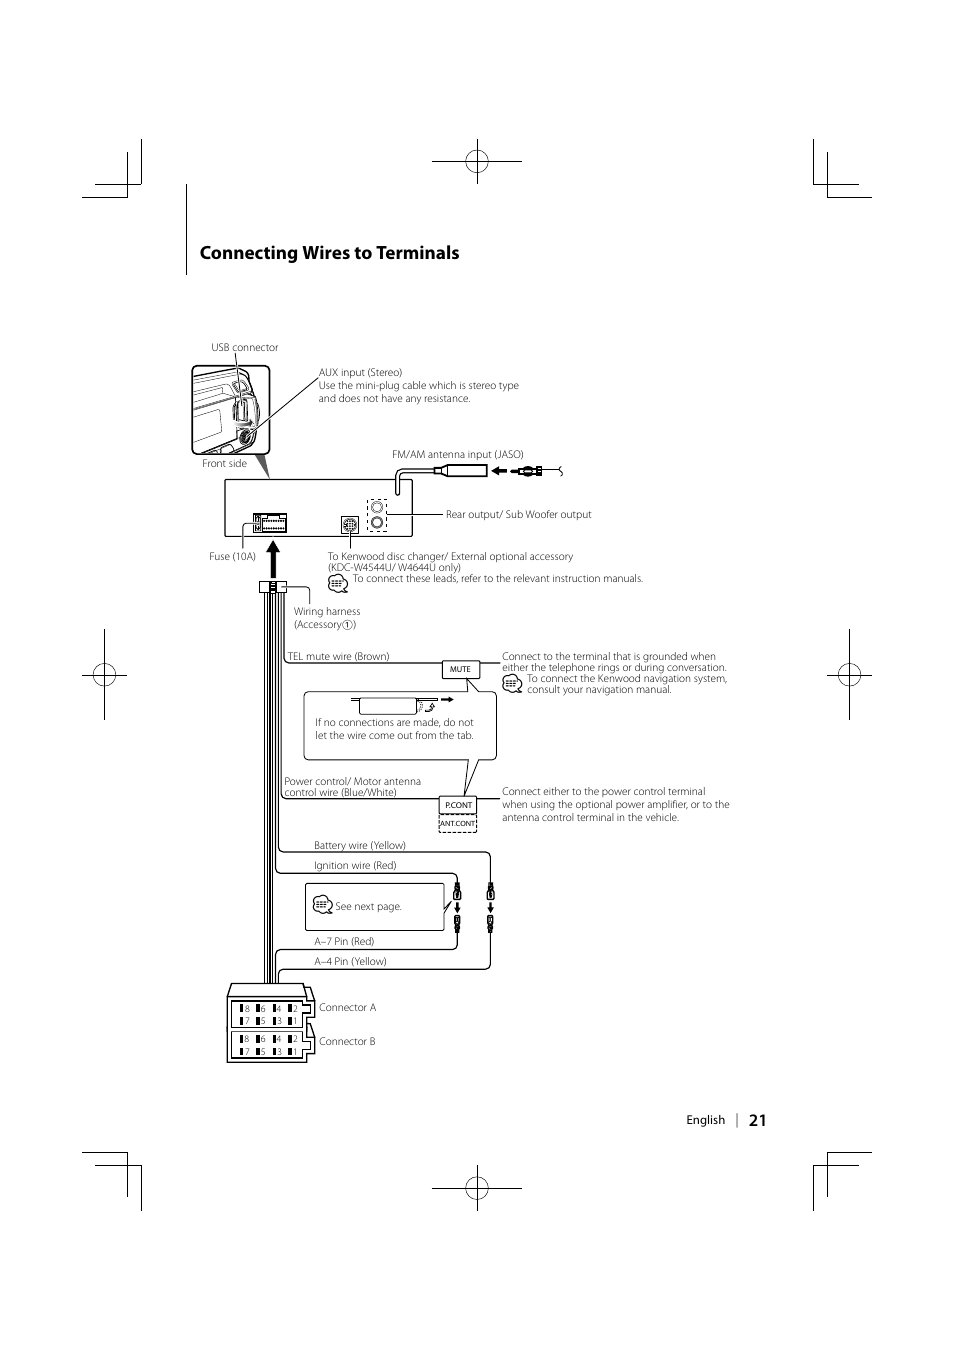 Connecting wires to terminals | Kenwood KDC-W413UA User Manual | Page 21 /  27